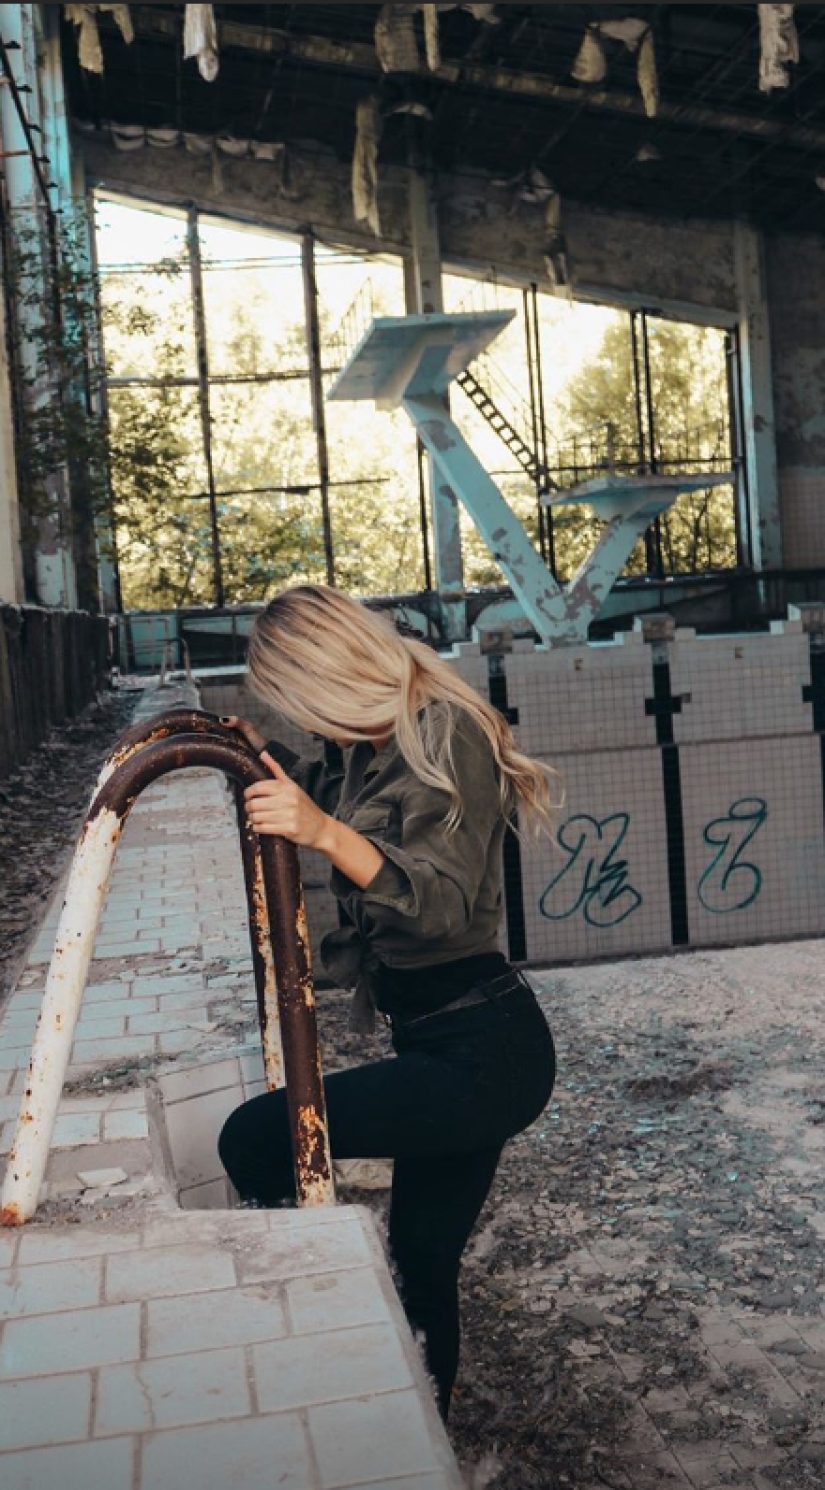 Instagram models take candid photos in the Chernobyl zone and many are outraged by this